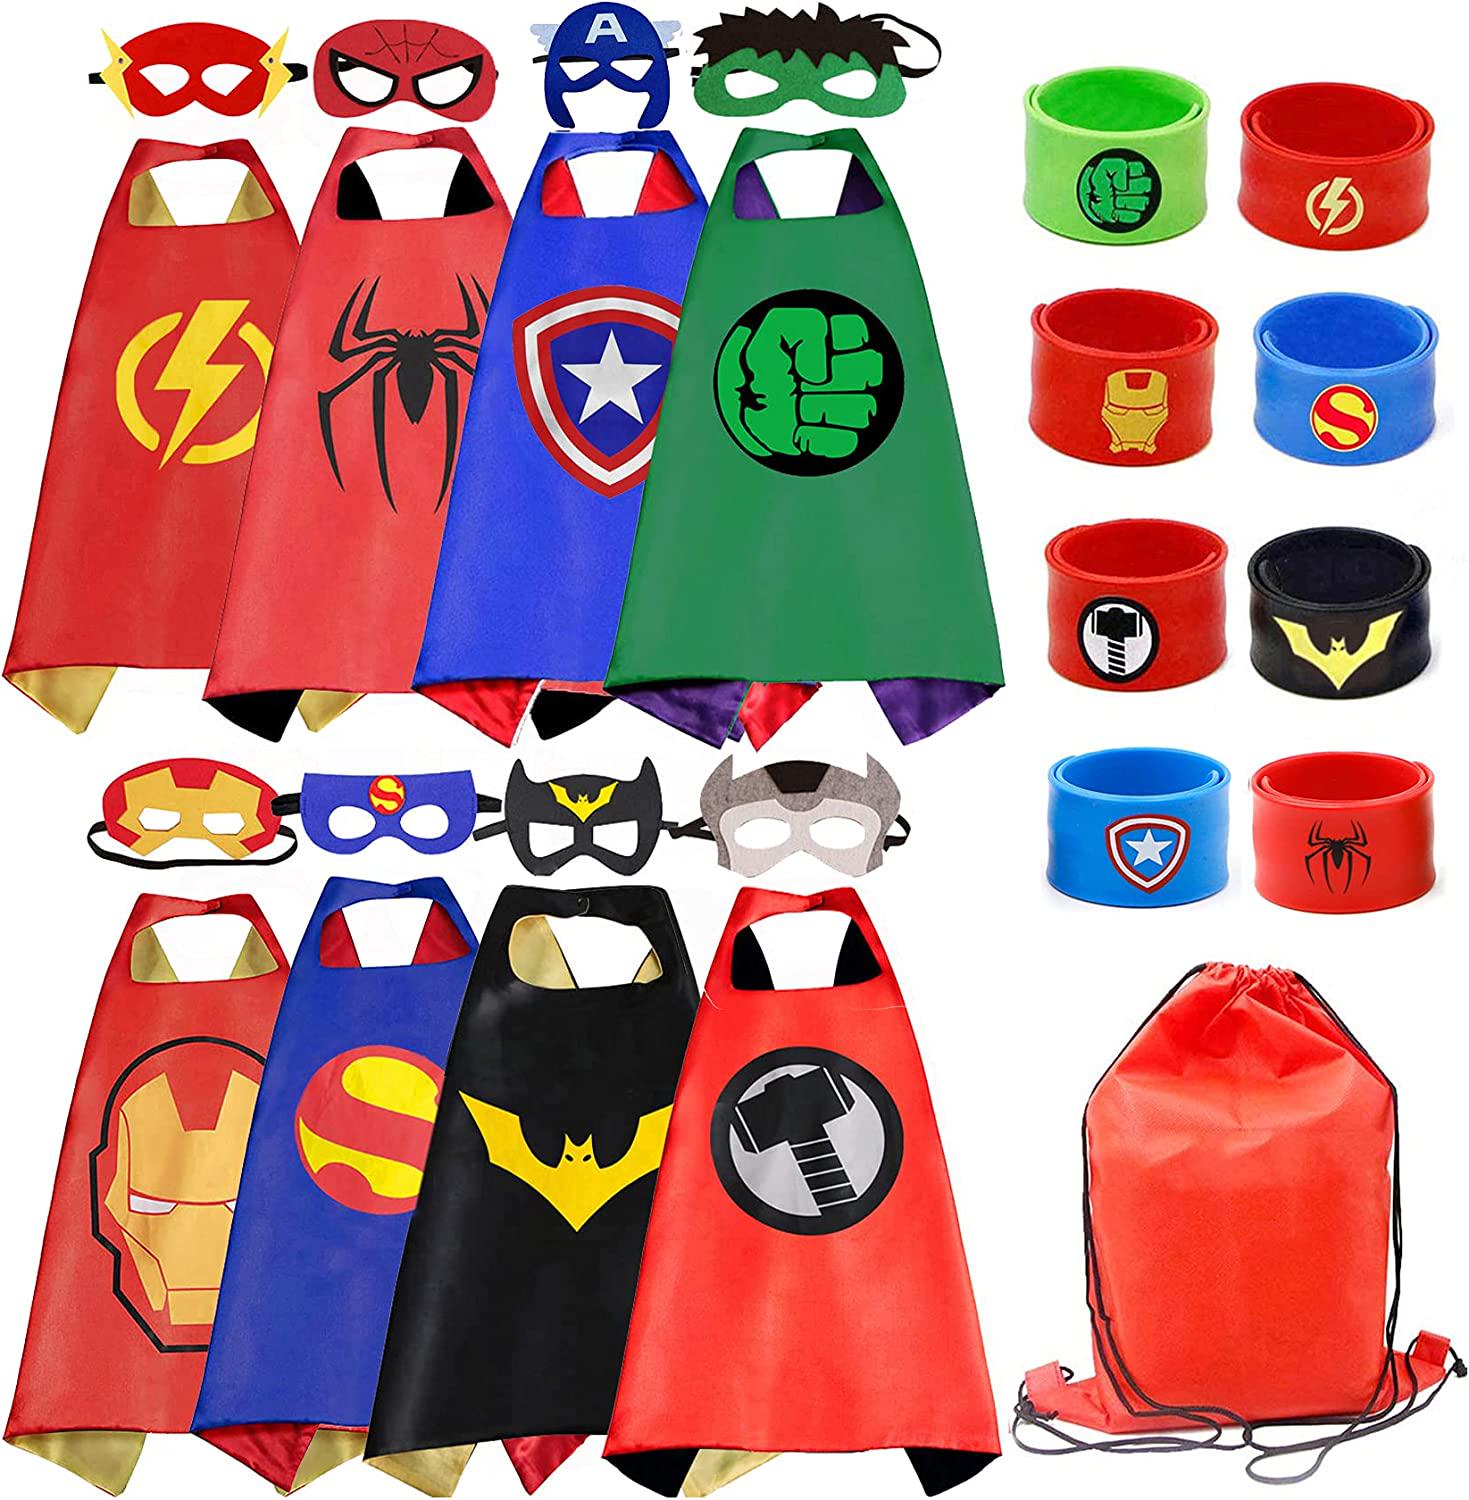 RioRand, Kids Dress Up Superhero Capes Set and Slap Bracelets for Boys Costumes Birthday Party Gifts